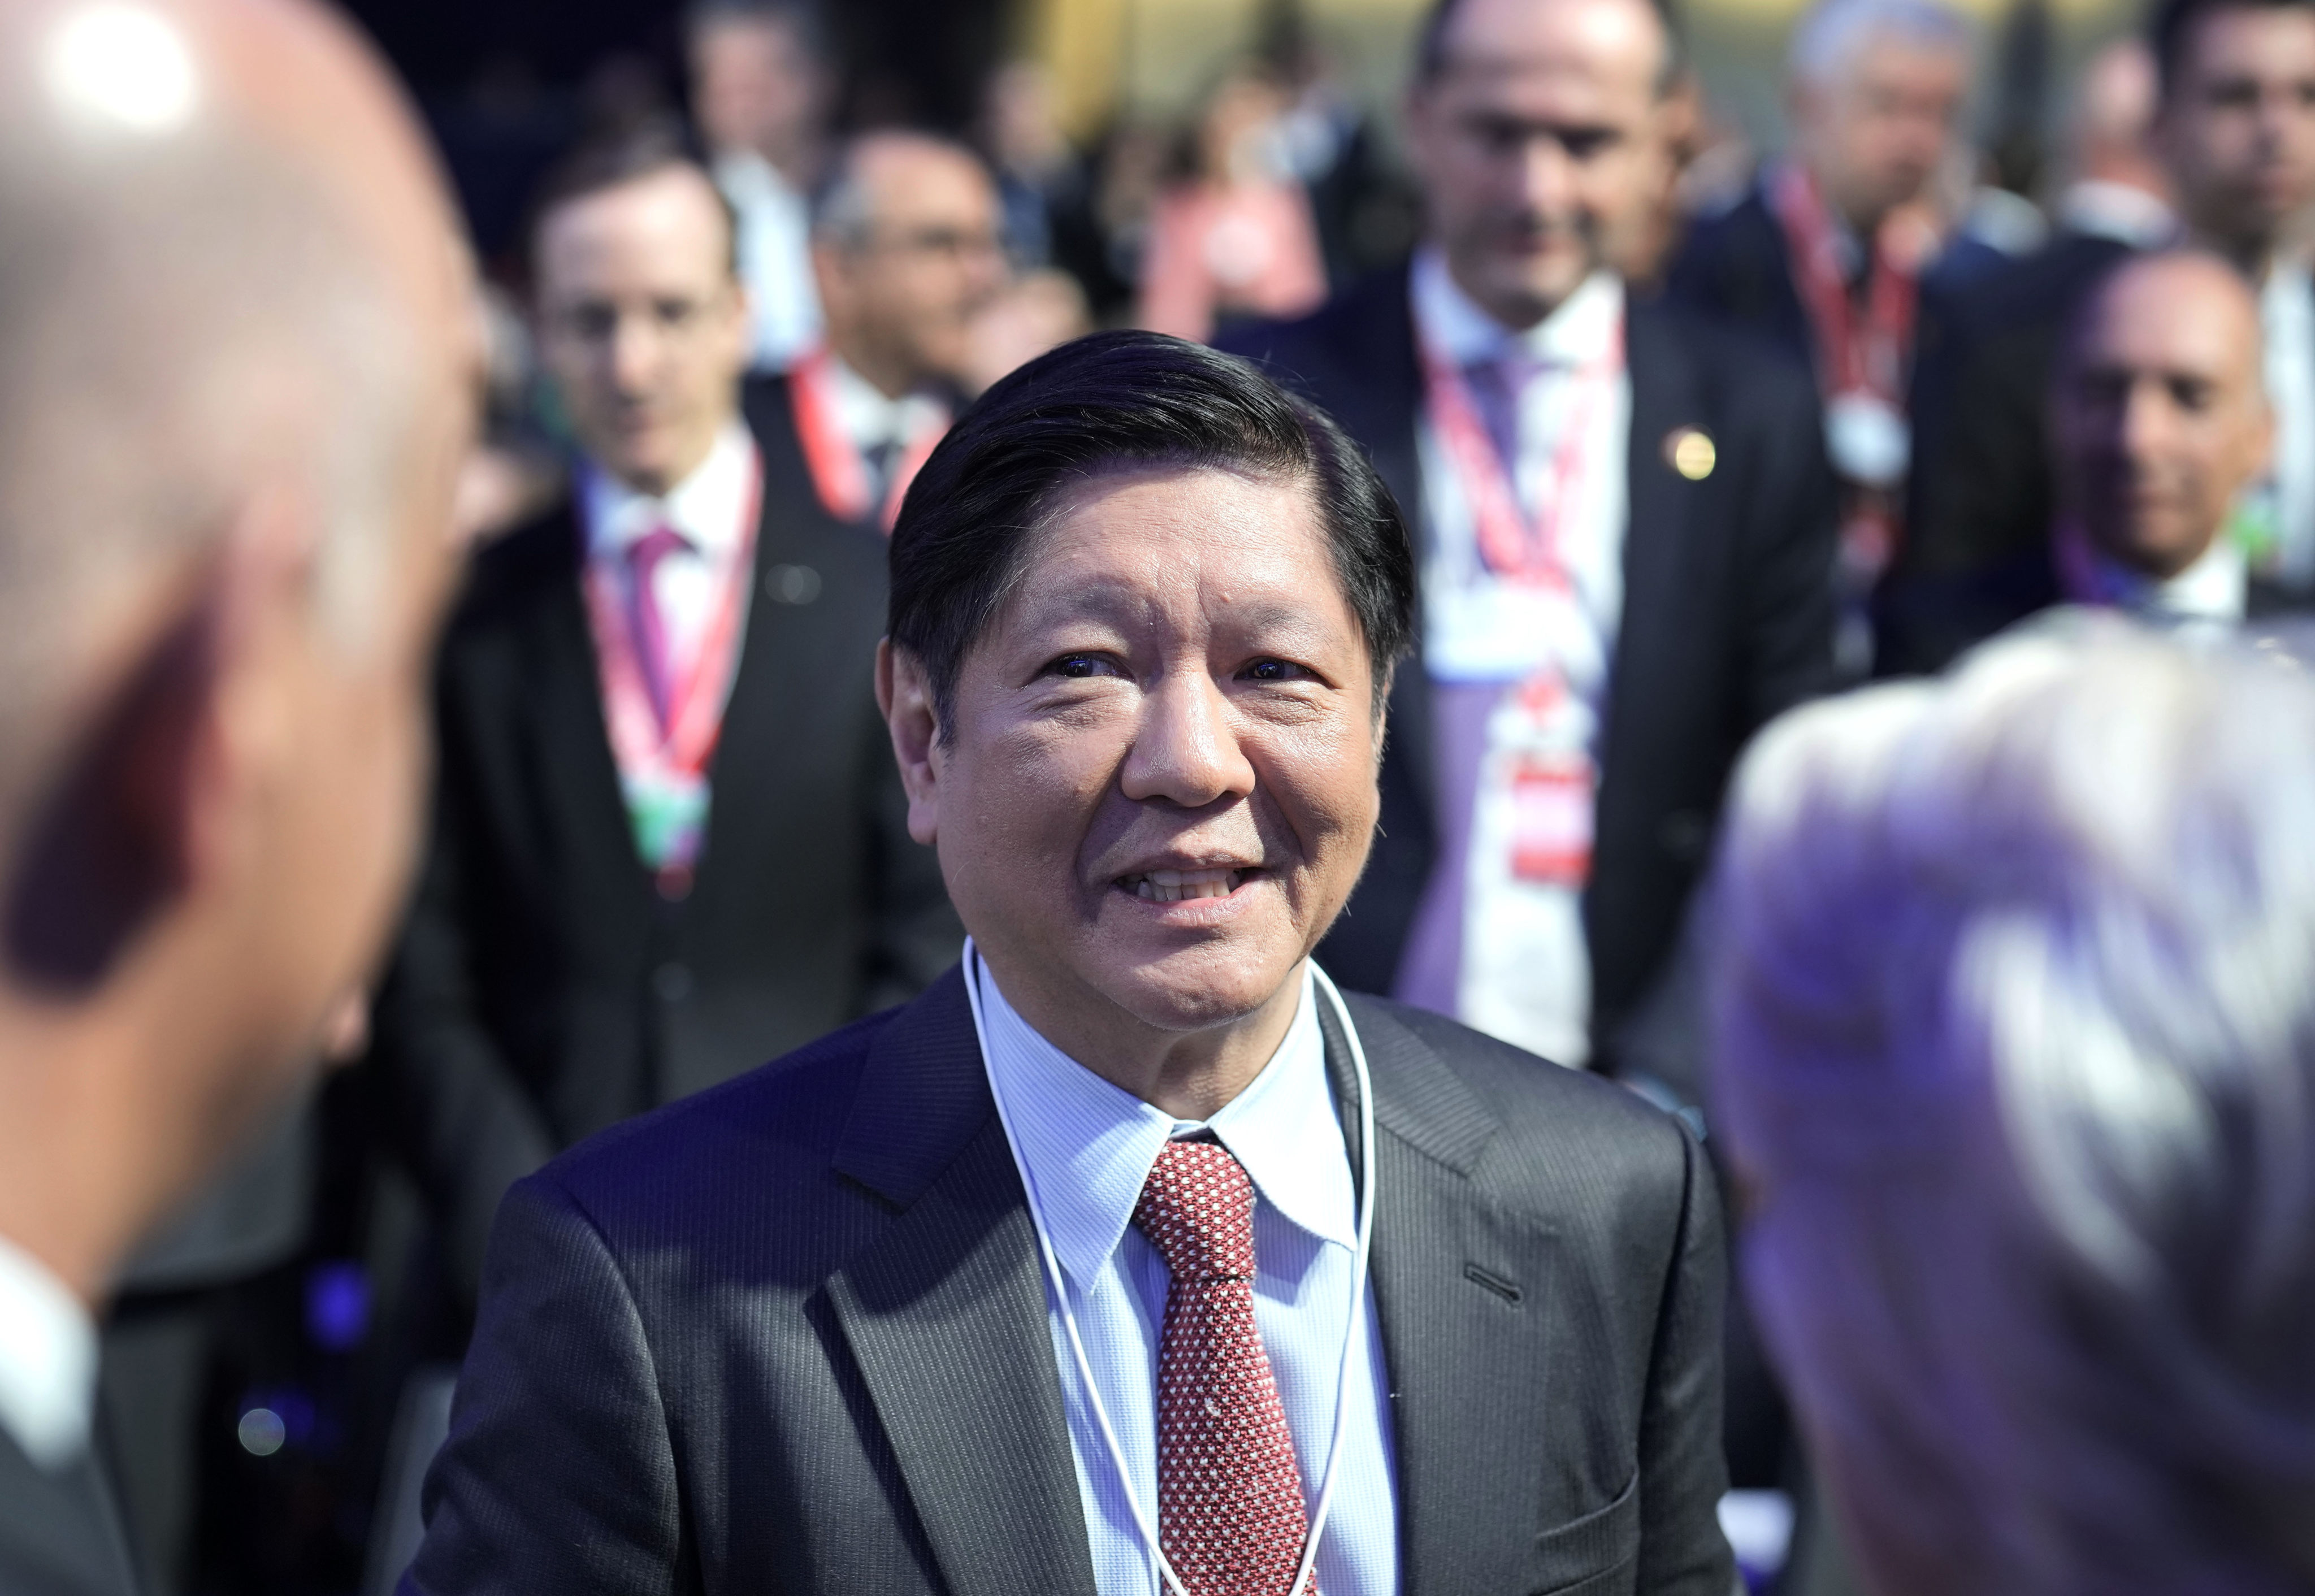 Ferdinand Marcos Jnr, President of the Philippines, at the World Economic Forum in Davos in January. He will soon be in Japan on a trip aimed at further strengthening the two nations’ relationship. Photo: AP